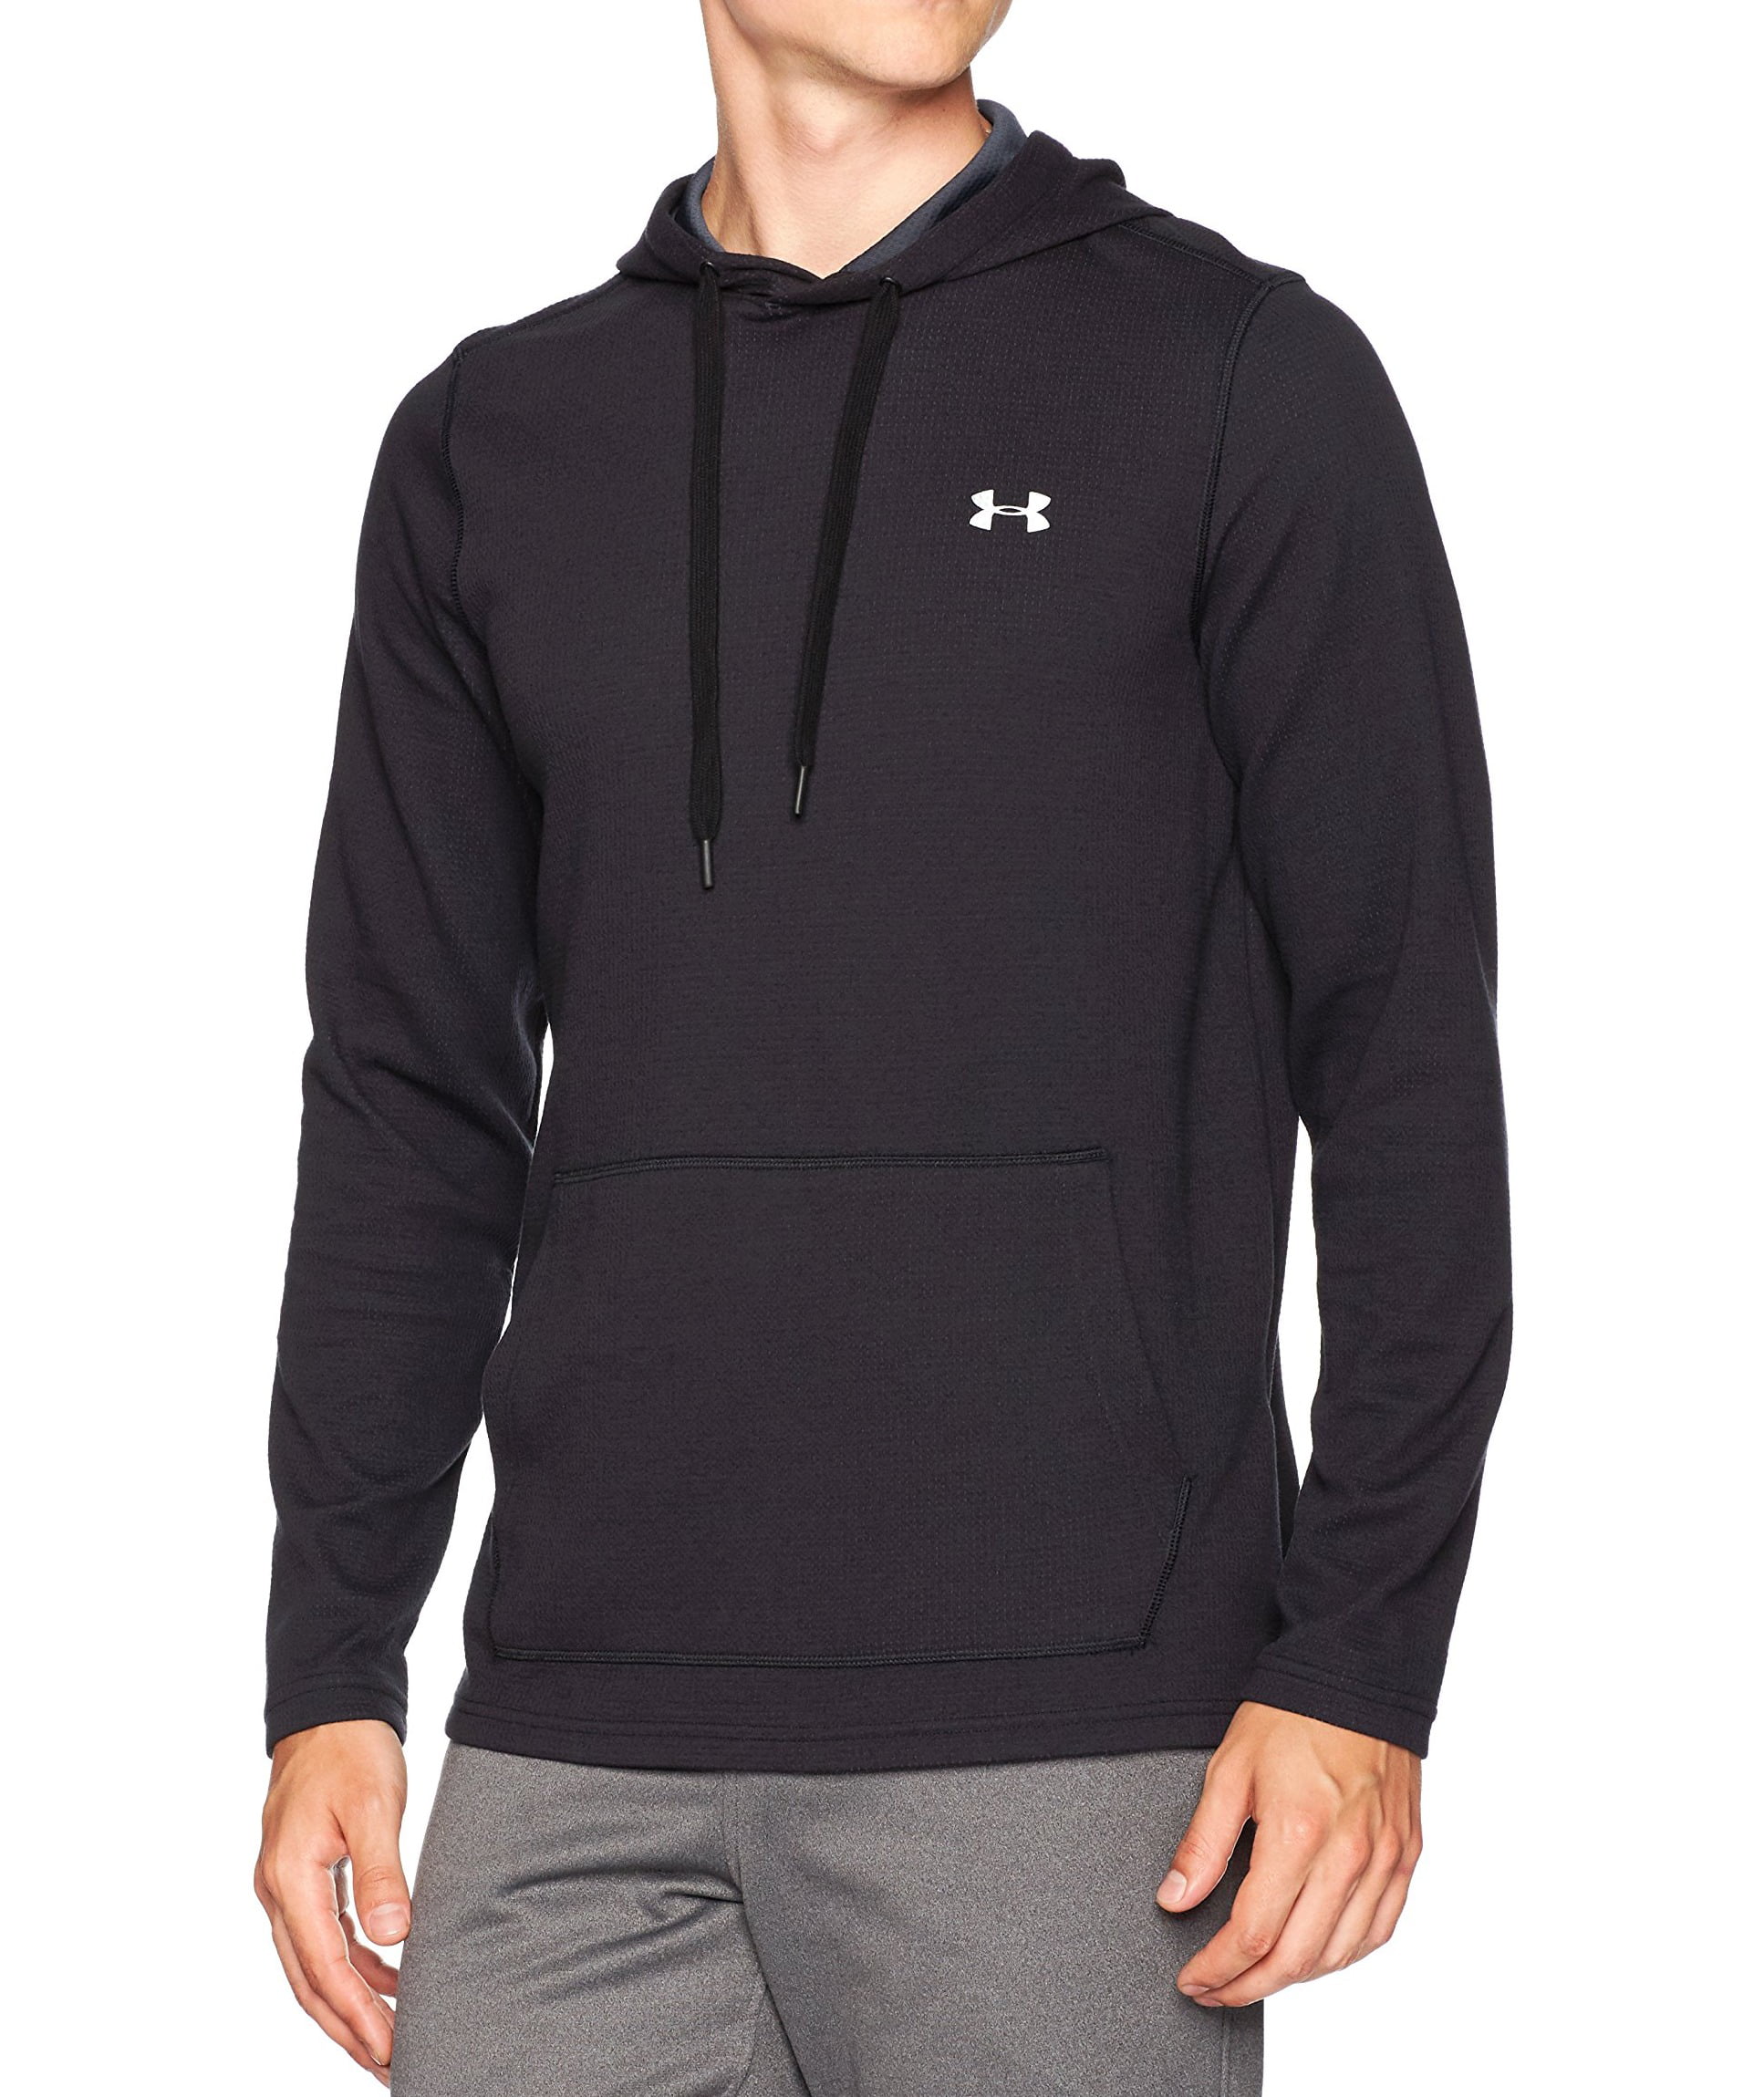 Under Armour - Mens Hoodie Small Waffle Knit Fitted Pullover S ...